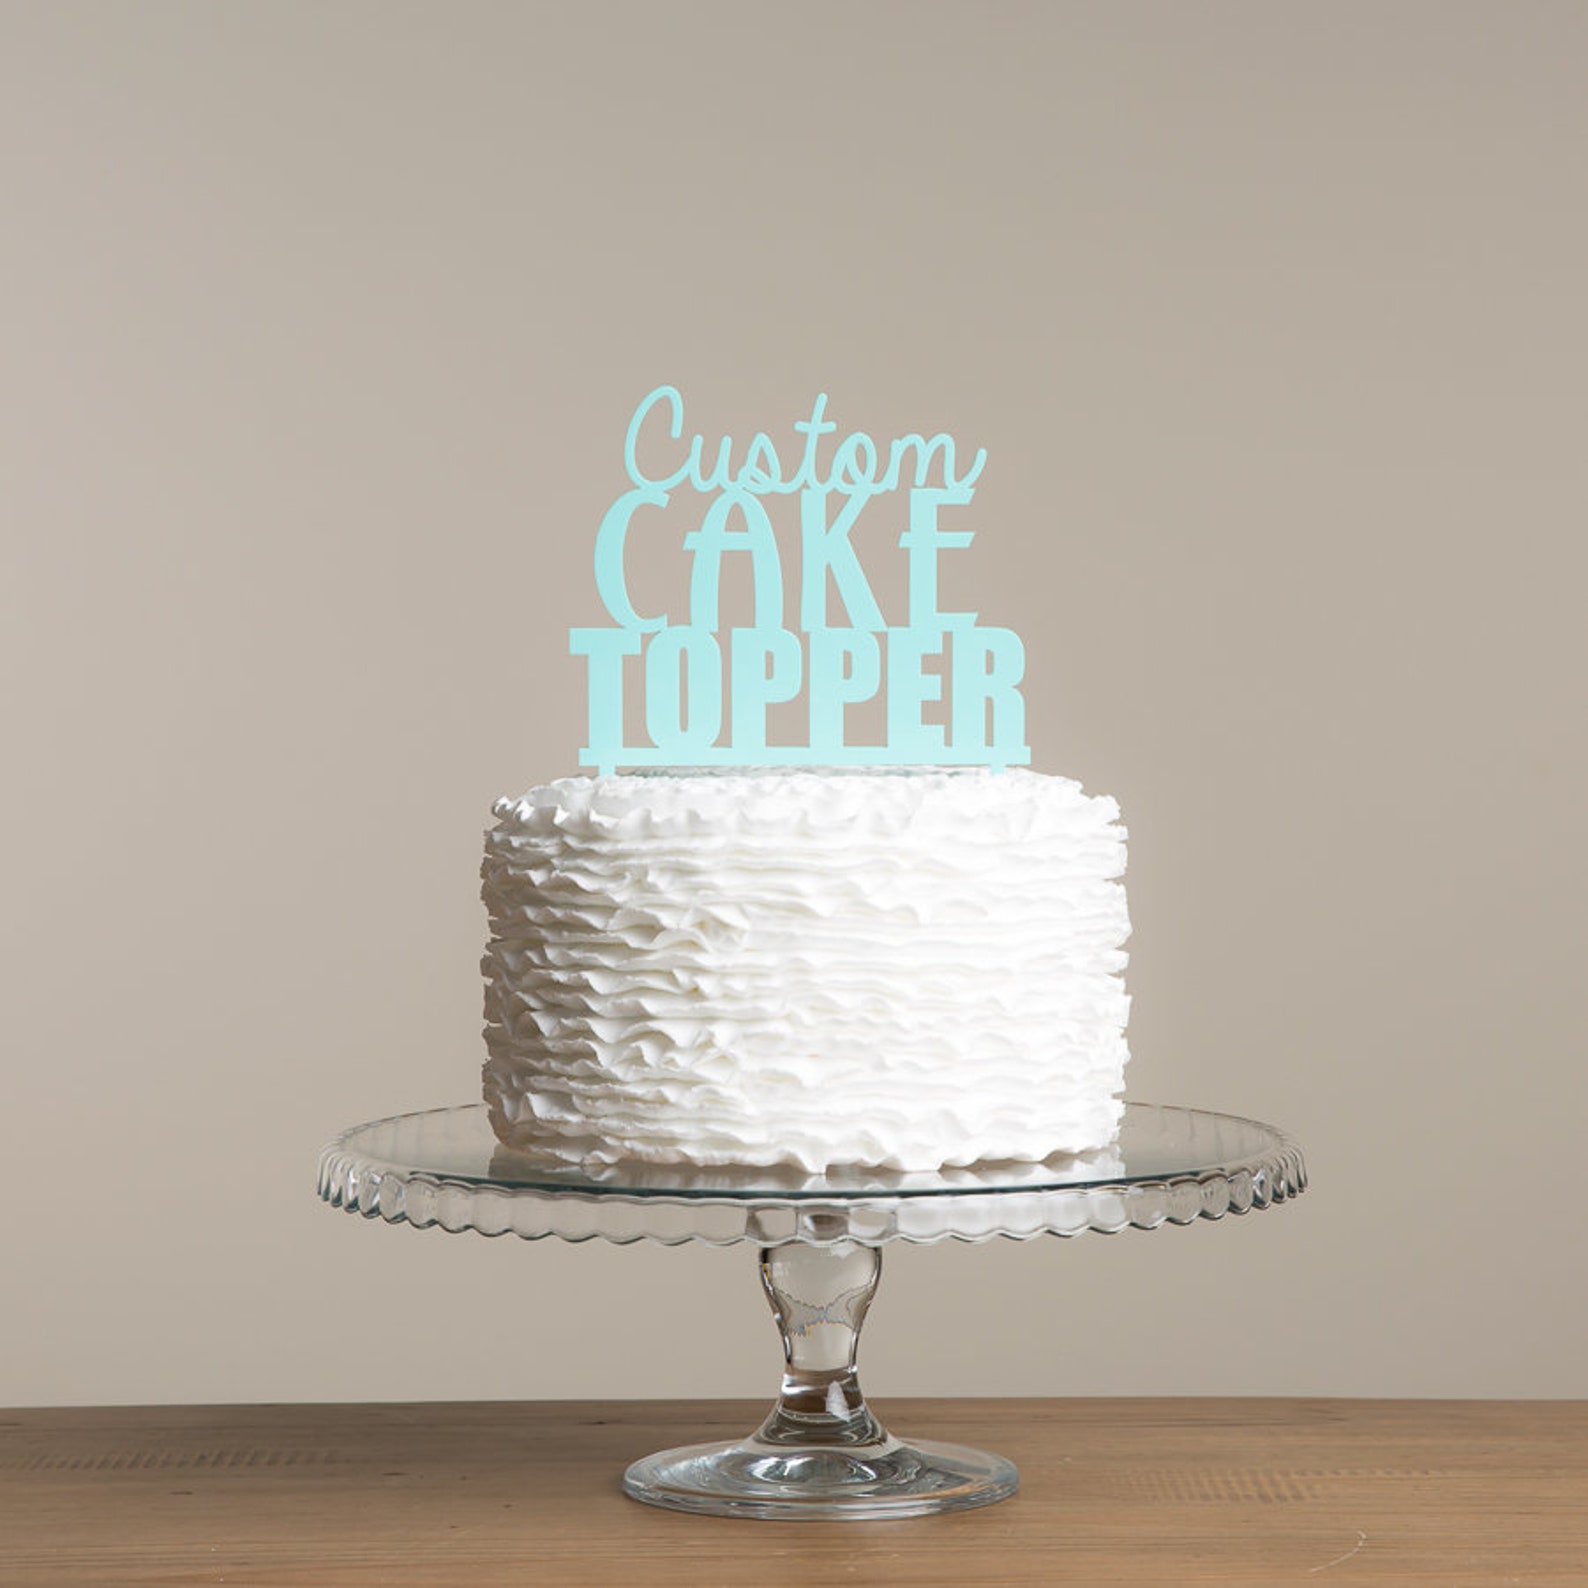 Design your own cake topper